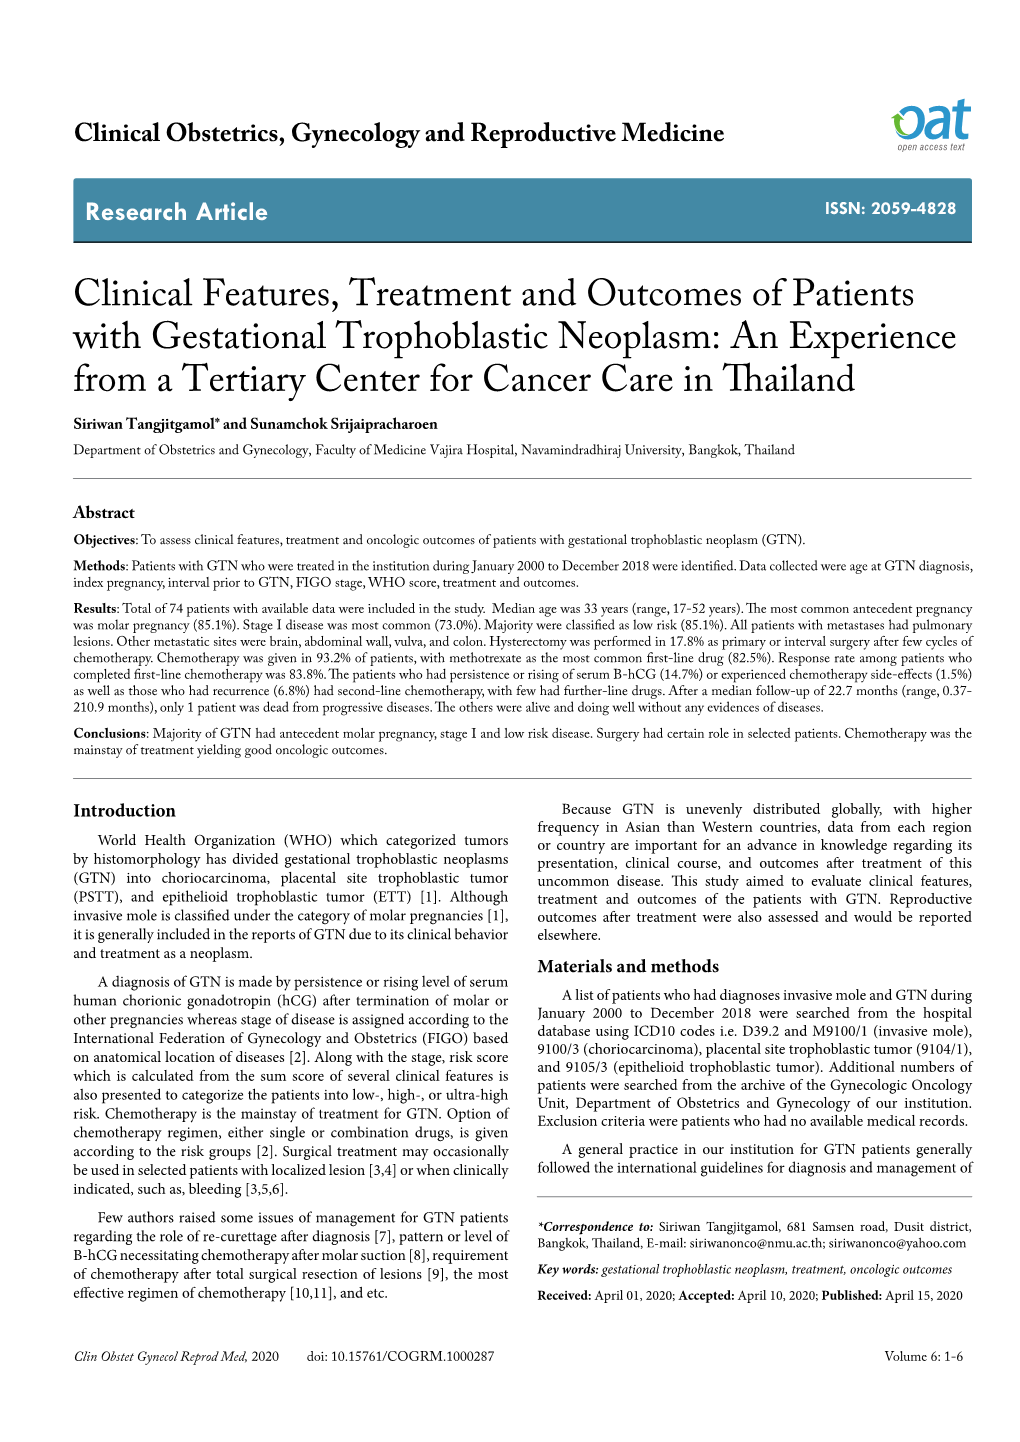 Clinical Features, Treatment and Outcomes of Patients With